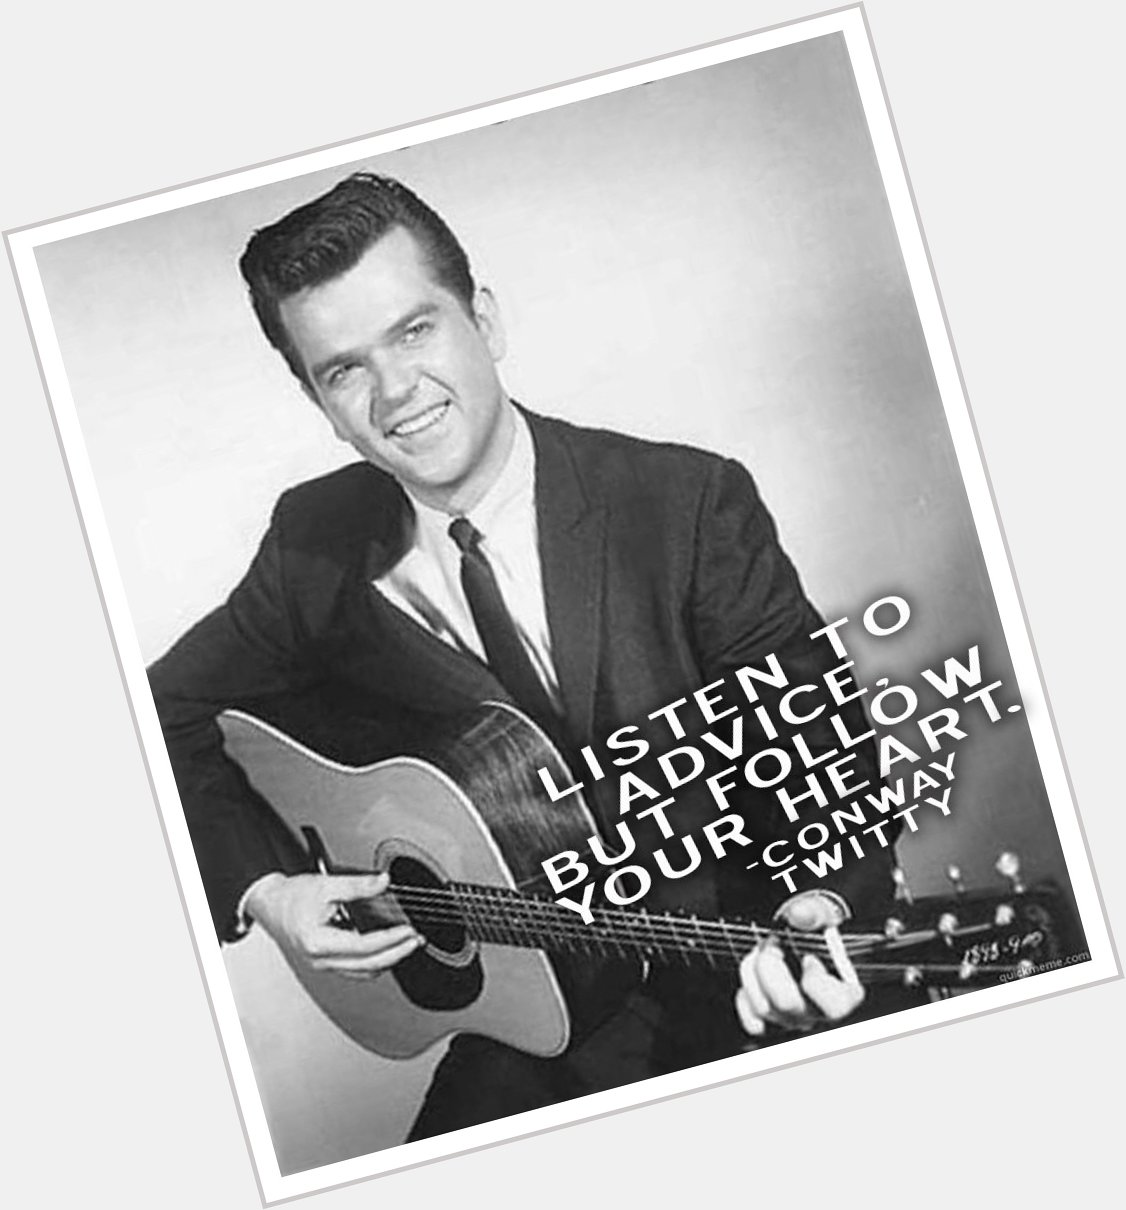 Happy Birthday to the late Conway Twitty! Let us know what your favorite Conway Twitty song is 